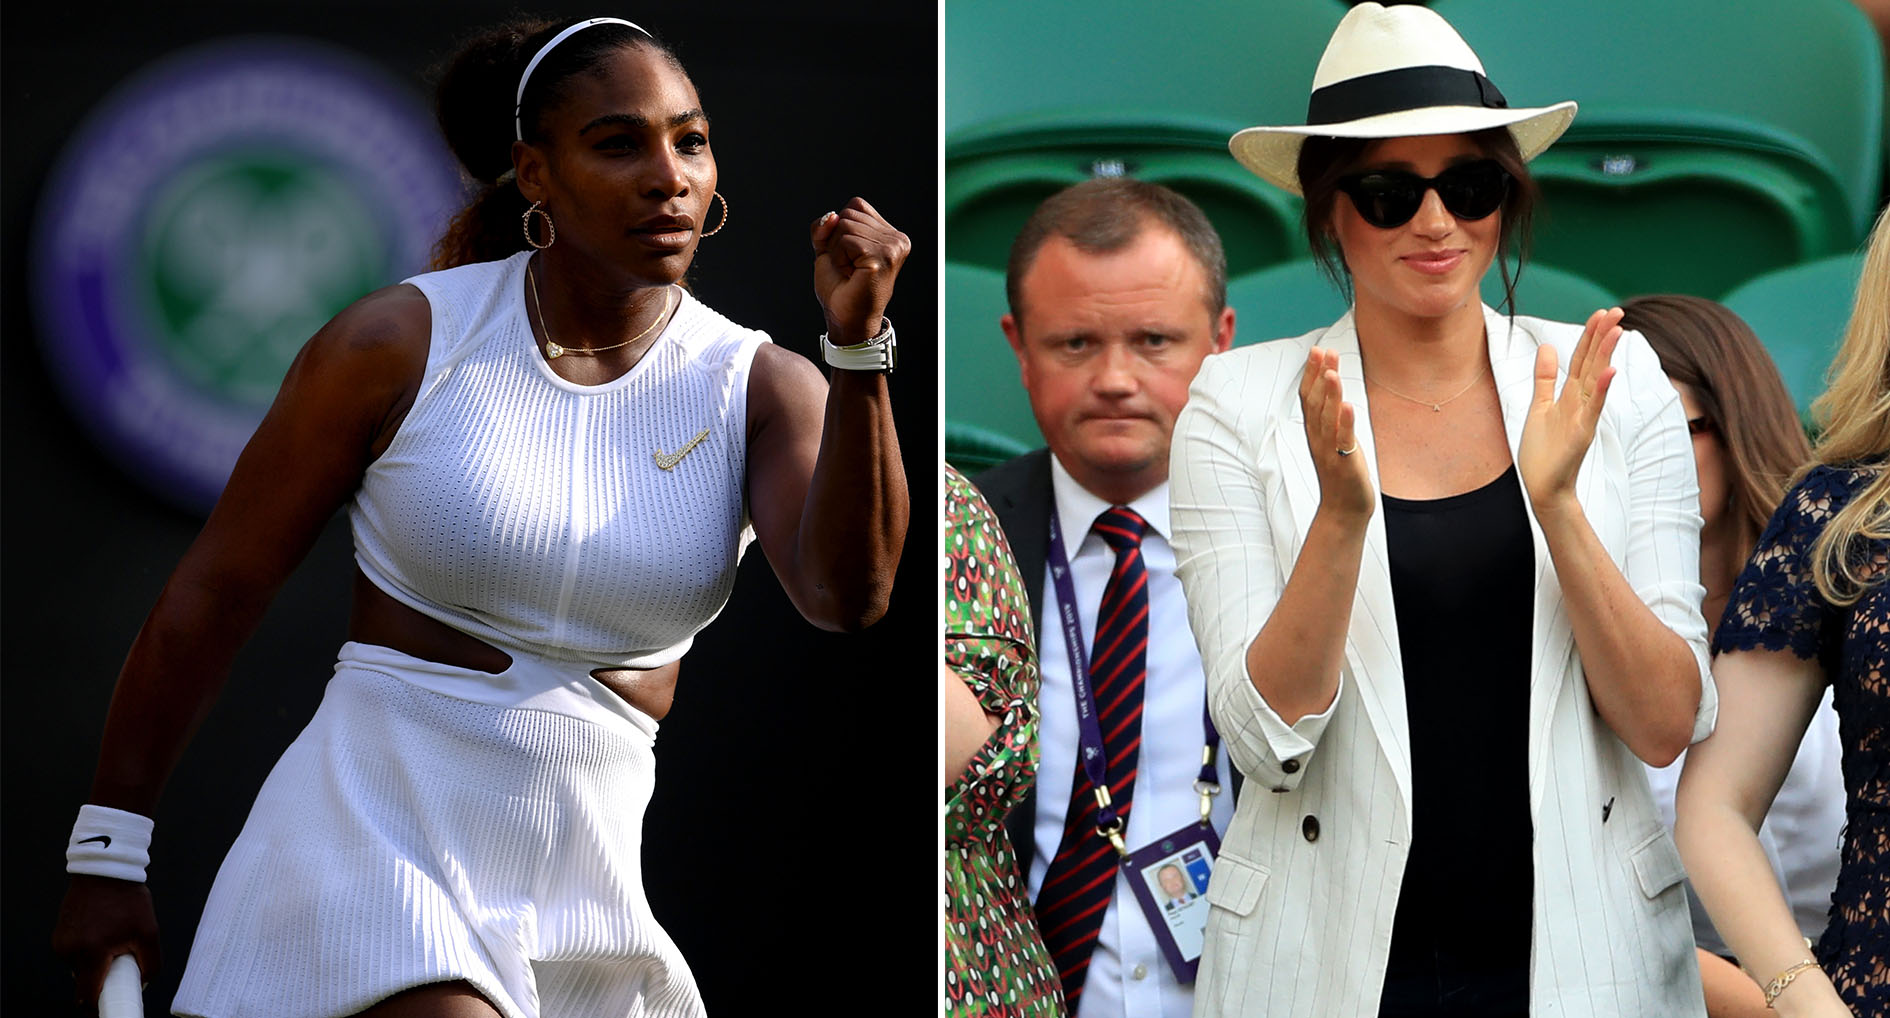 Serena Williams reveals she's not going to baby Archie's christening